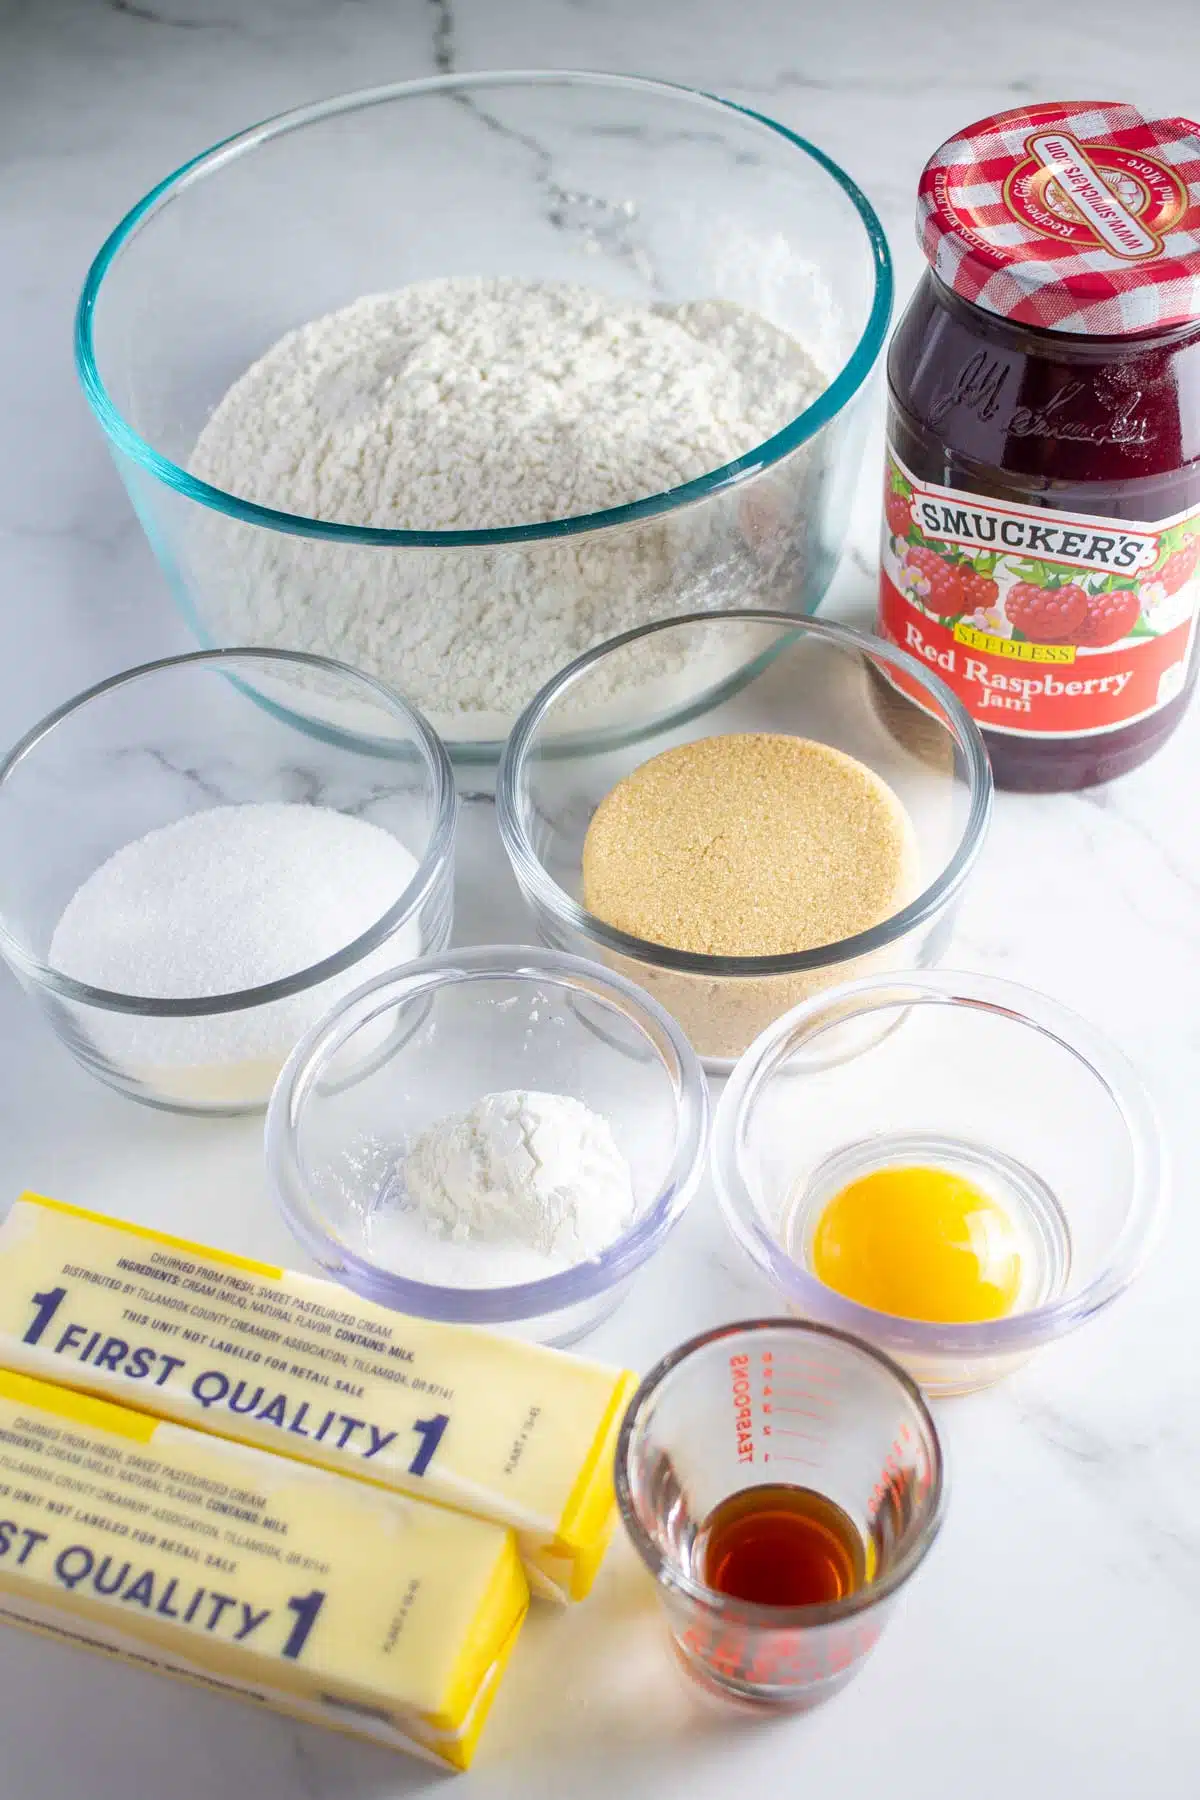 Tall image showing thumbprint cookie ingredients.